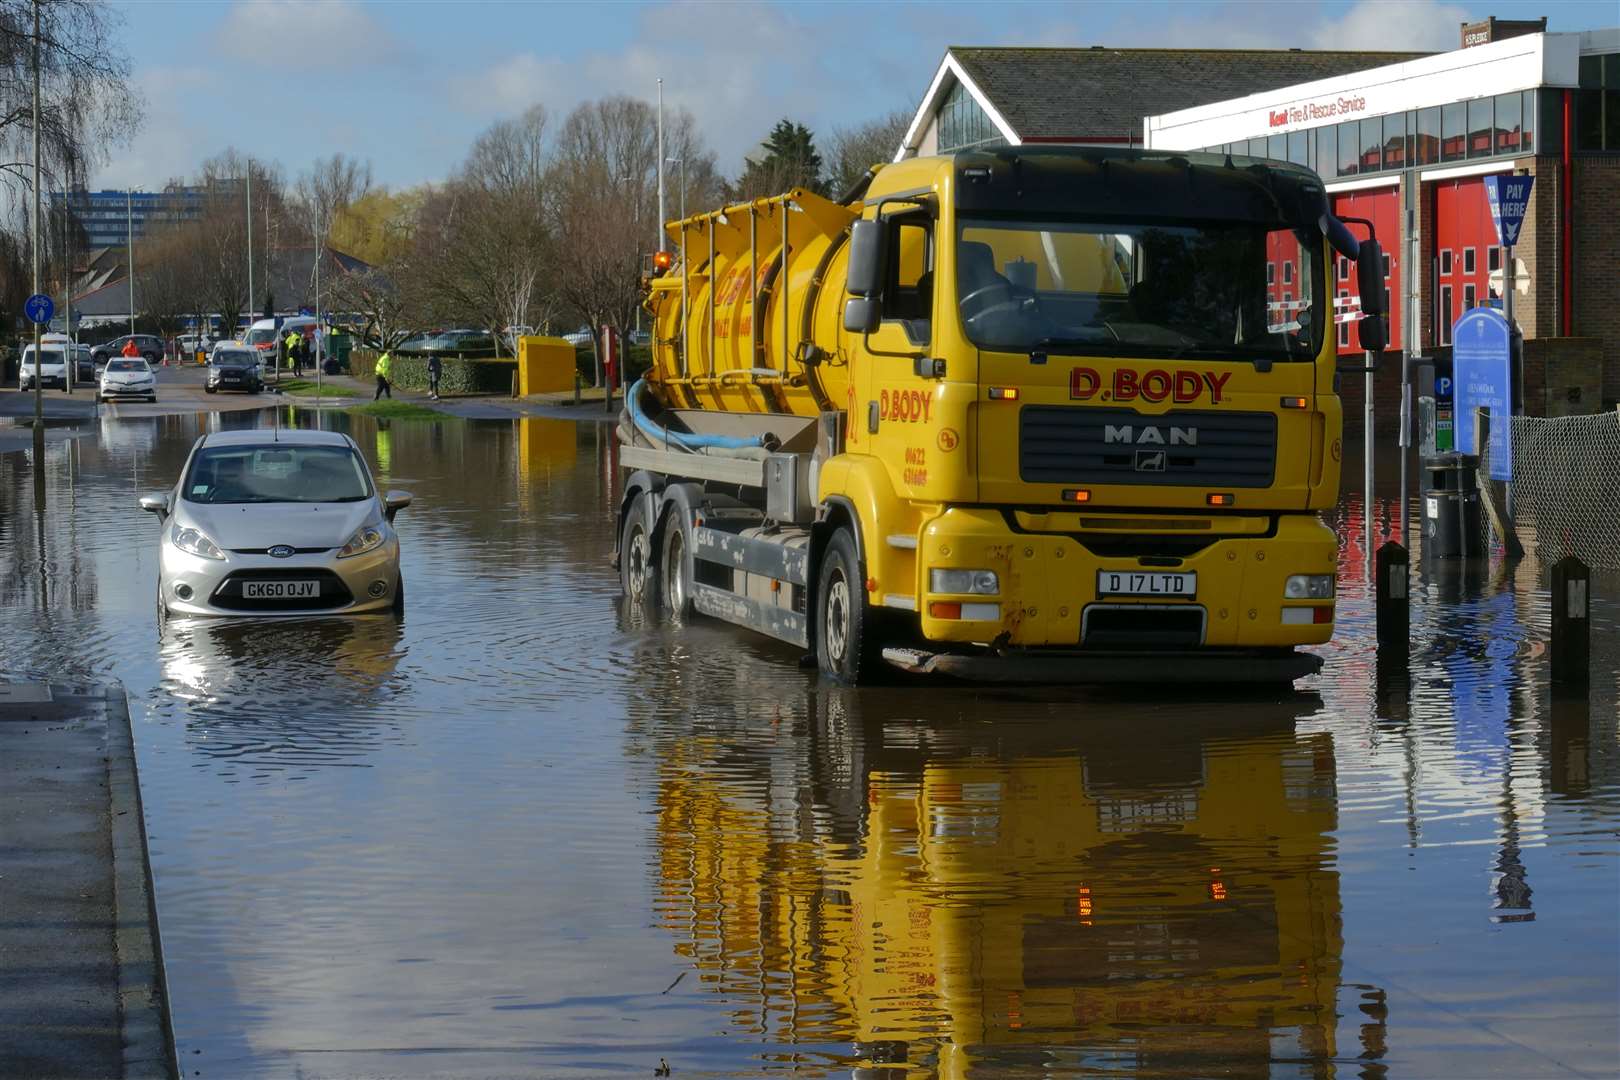 Contractors have been working to clear the road since early this morning. Picture: Andy Clark